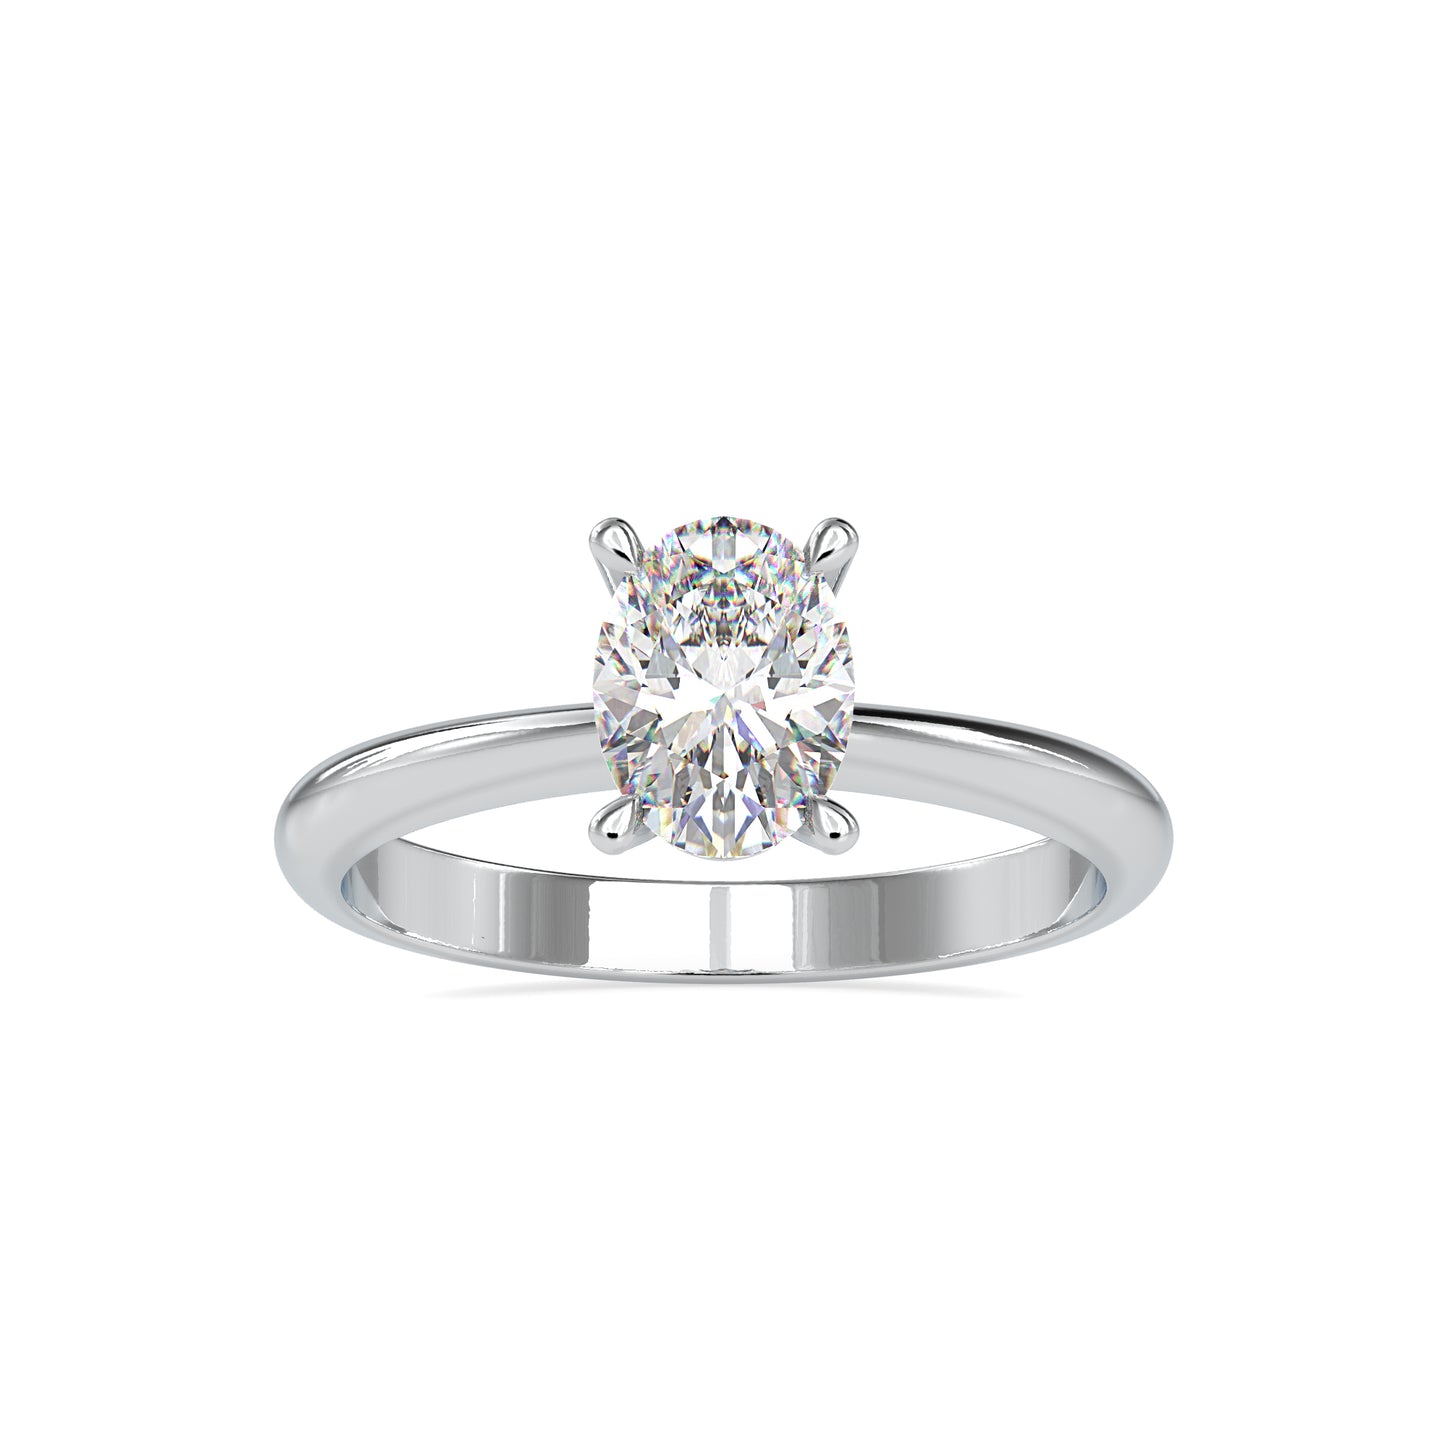 Oval Cut 1.01 CTW Solitaire Diamond Ring